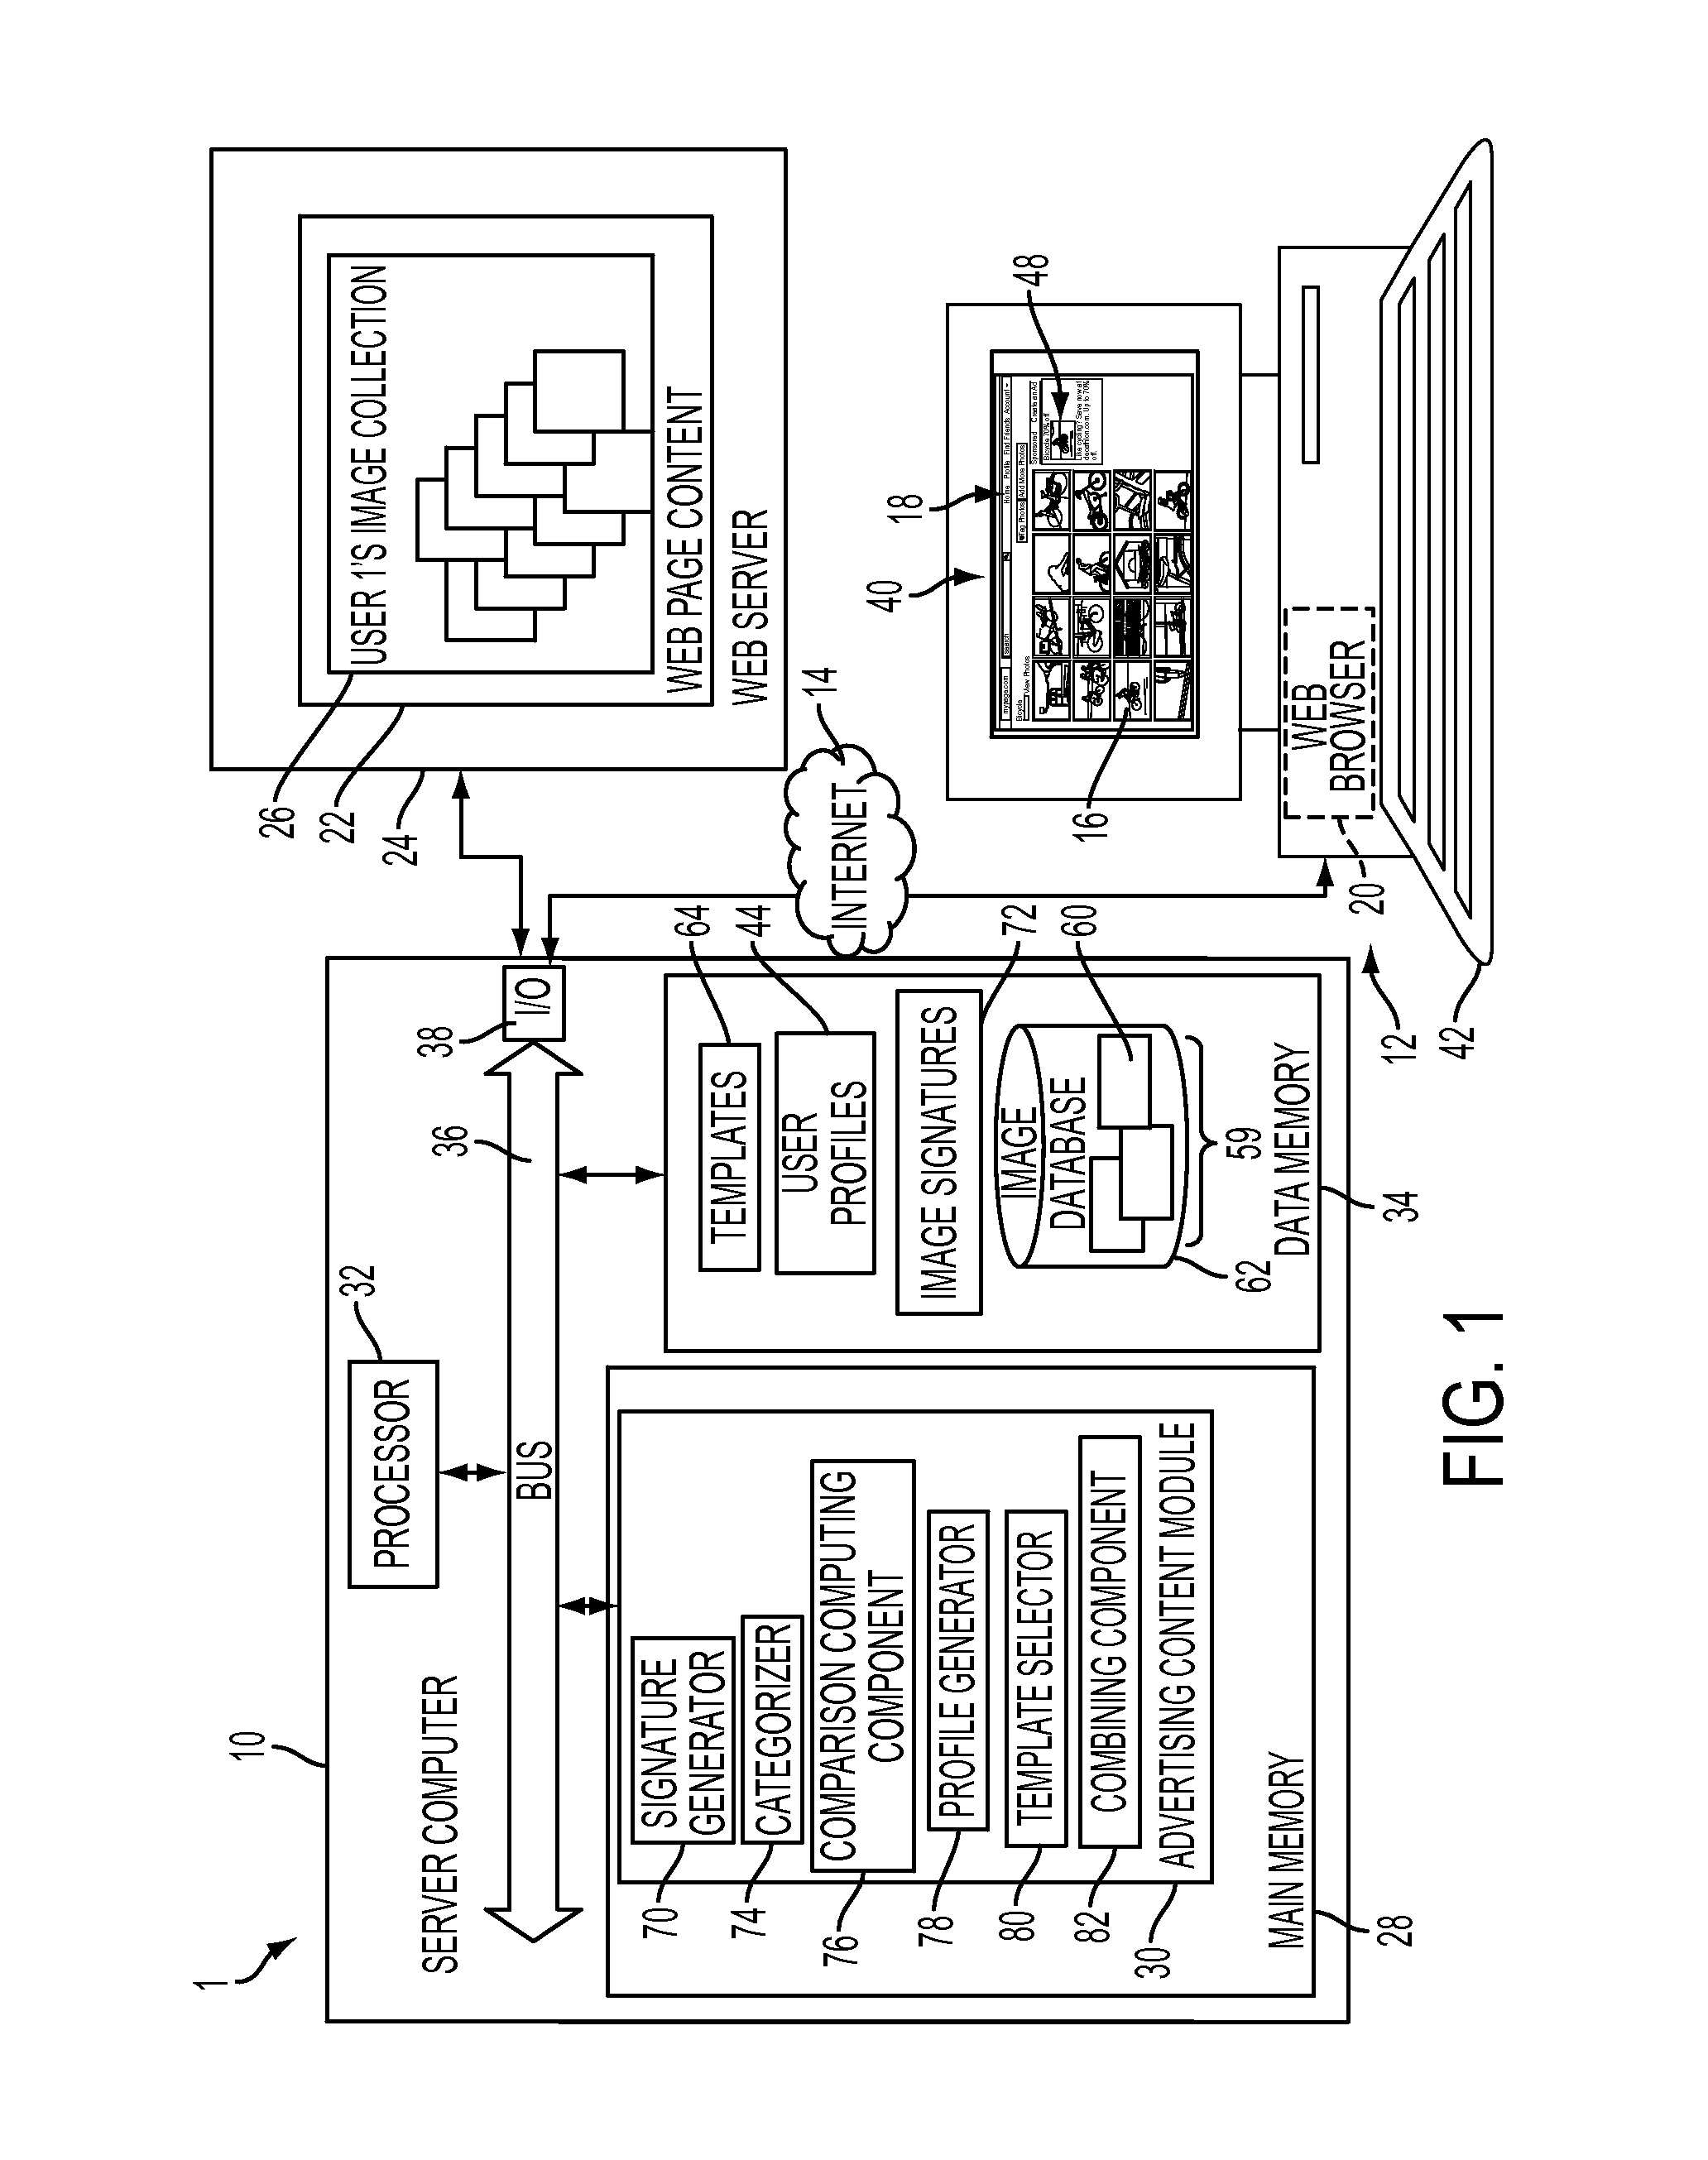 System and method for advertising using image search and classification